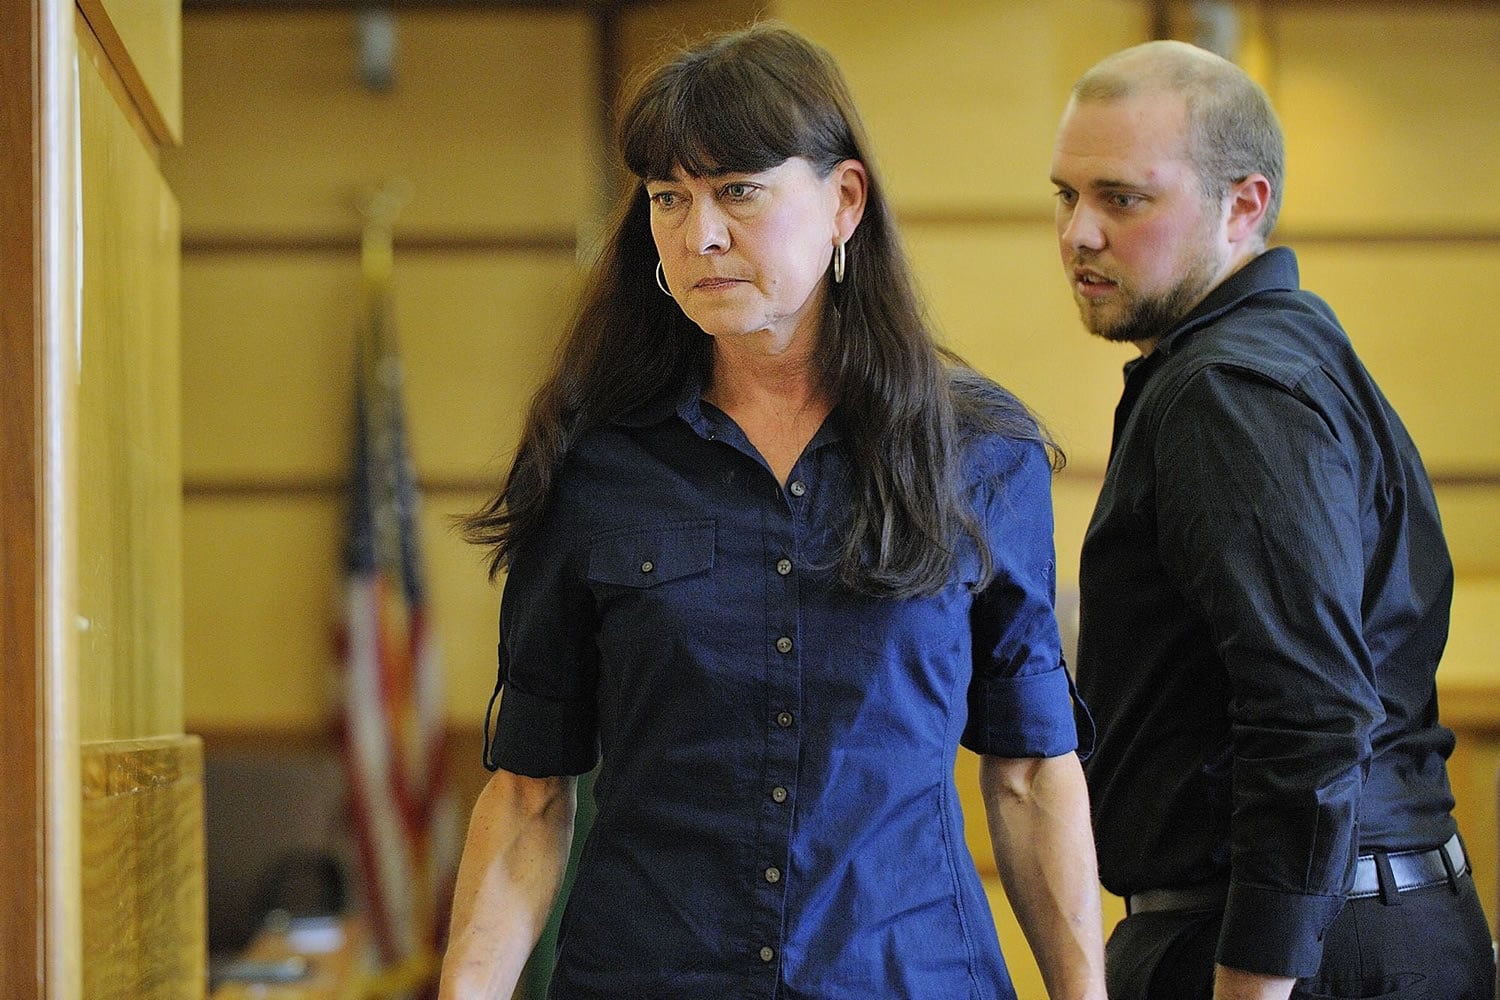 Billinda Jantzer of Washougal makes a first appearance Tuesday on suspicion of first-degree arson.